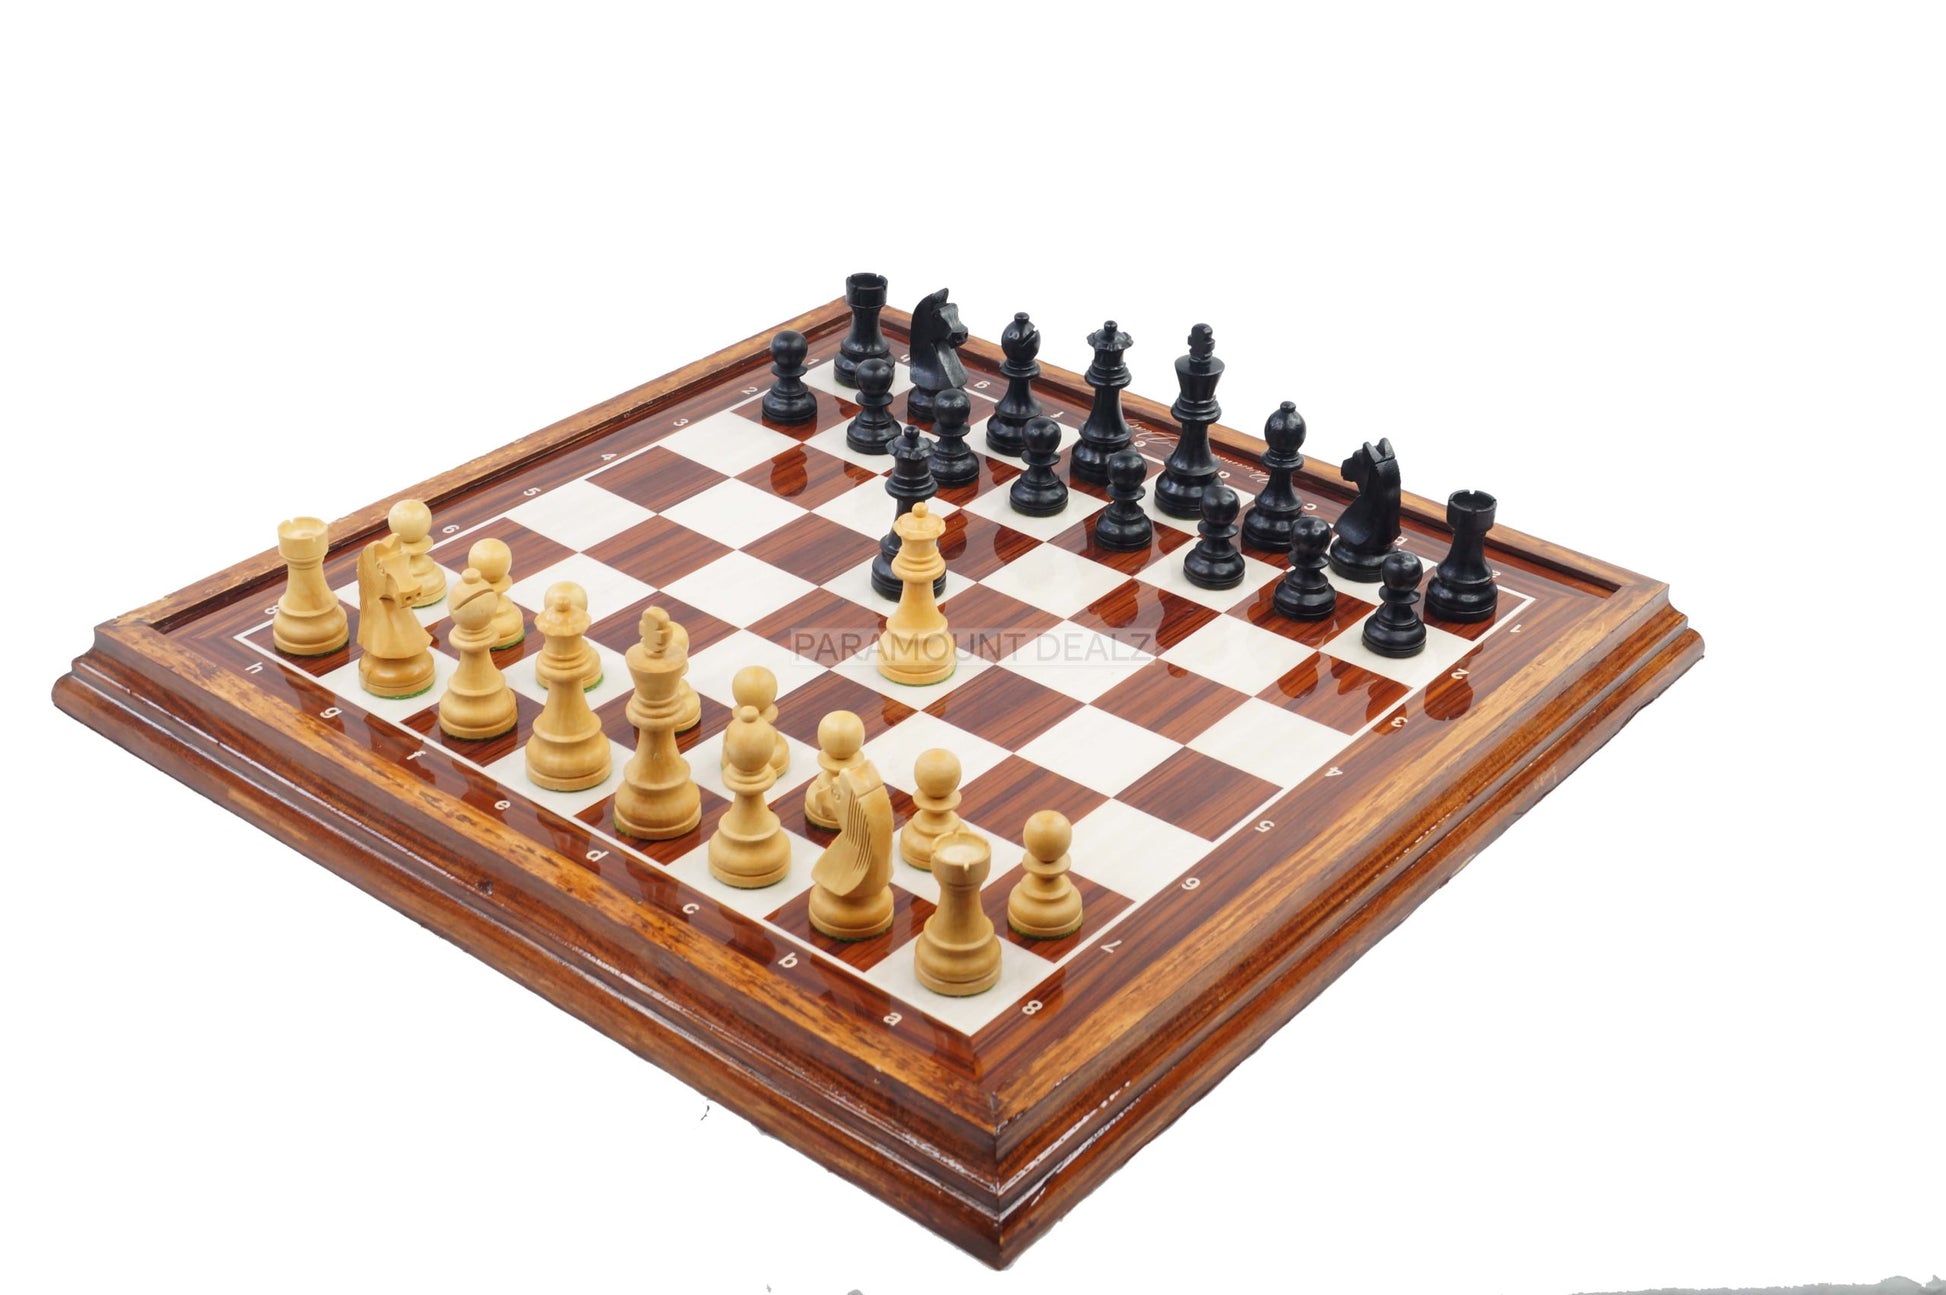 WOODEN LUXURIOUS CHESS TABLE